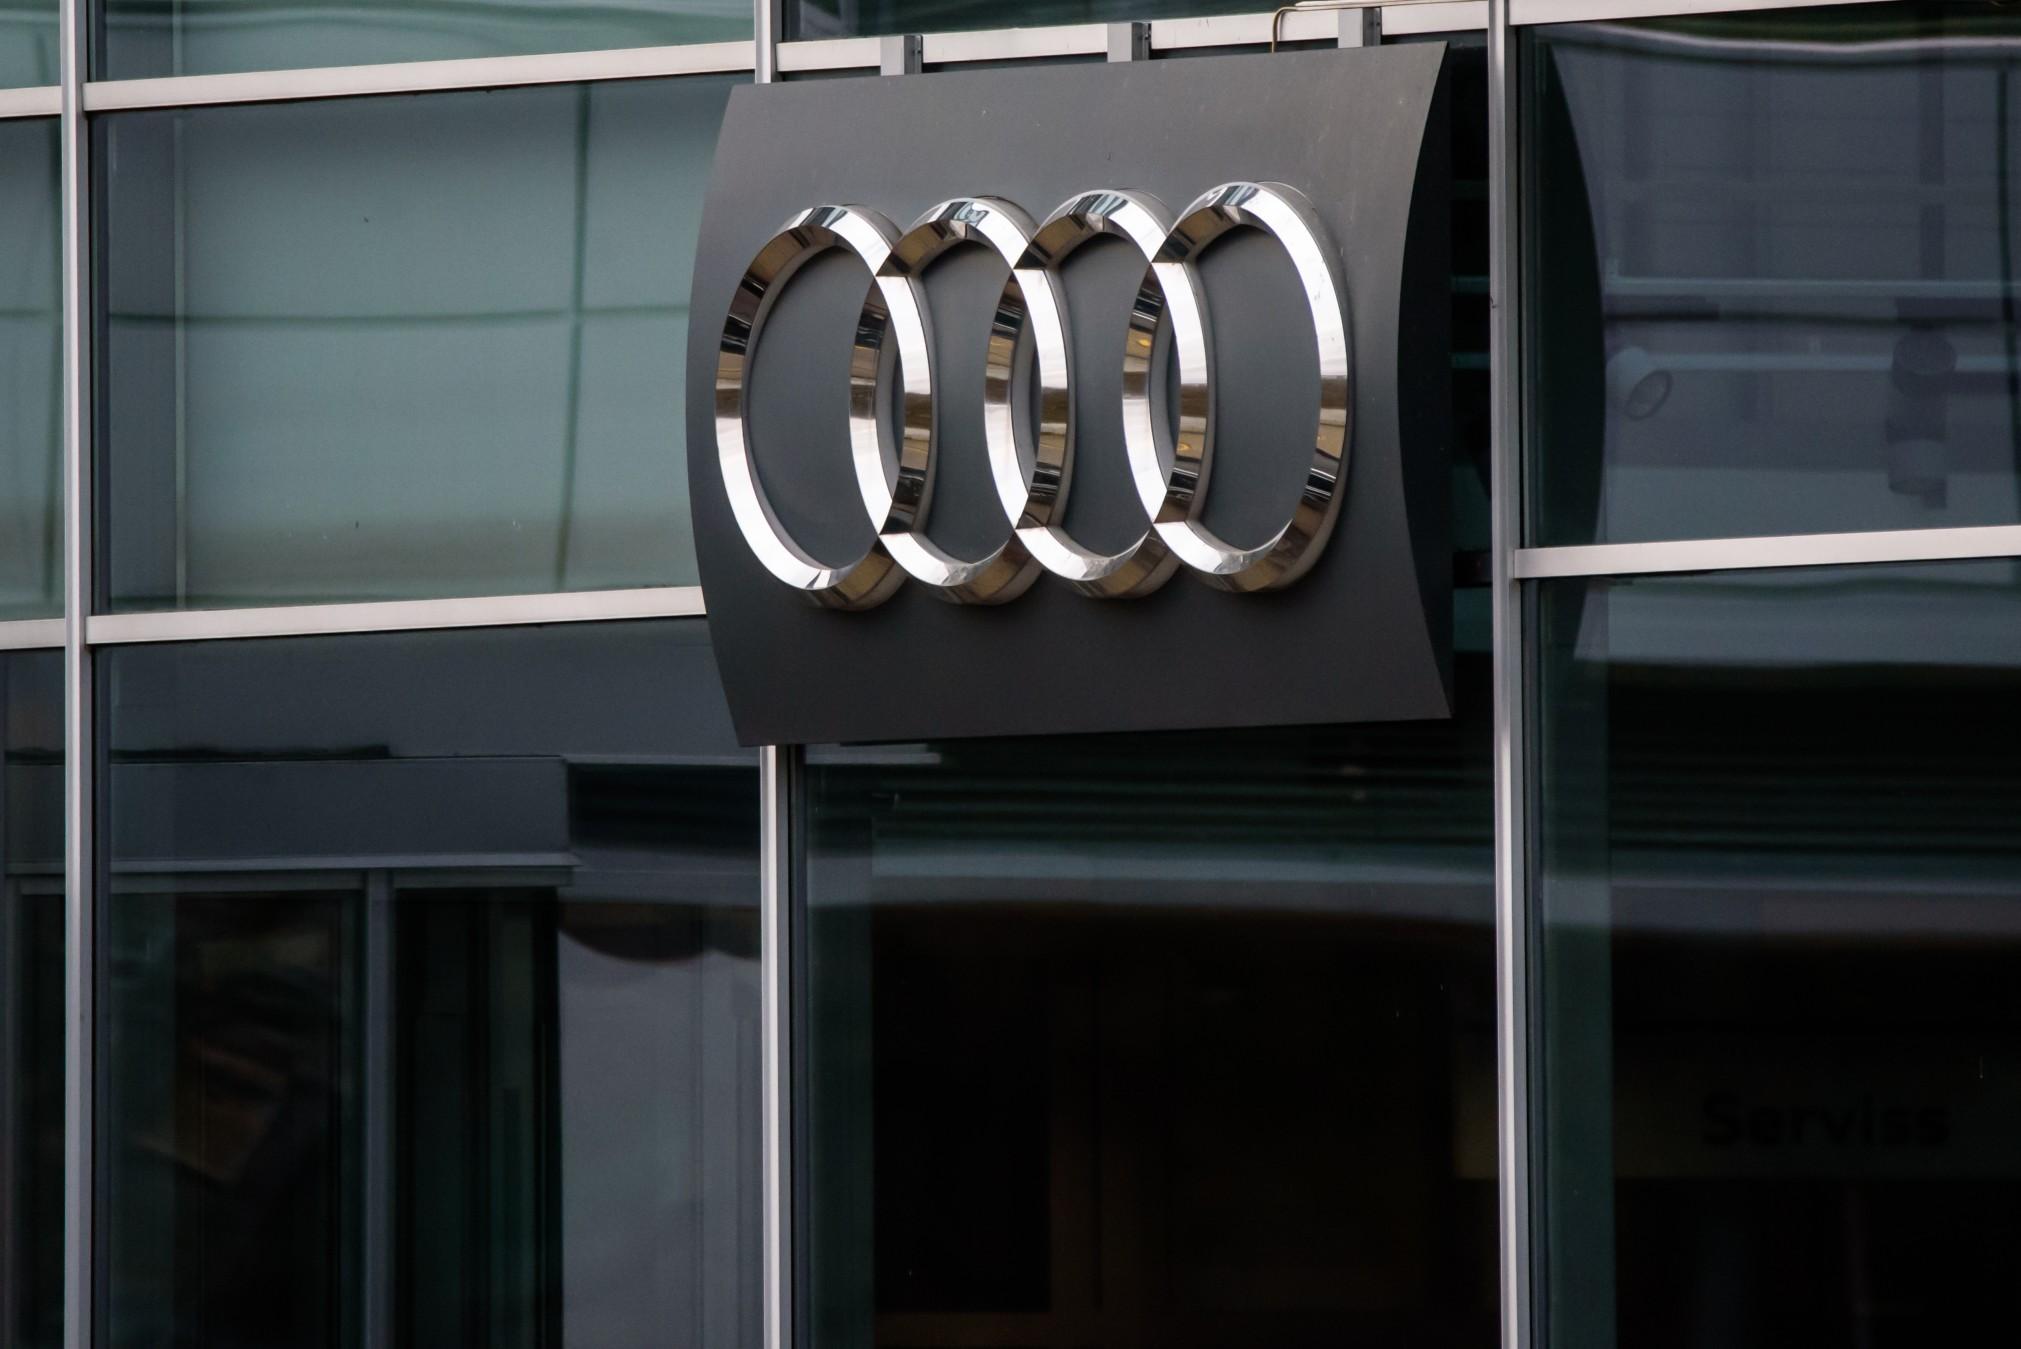 Audi is always looking to the future of the industry.